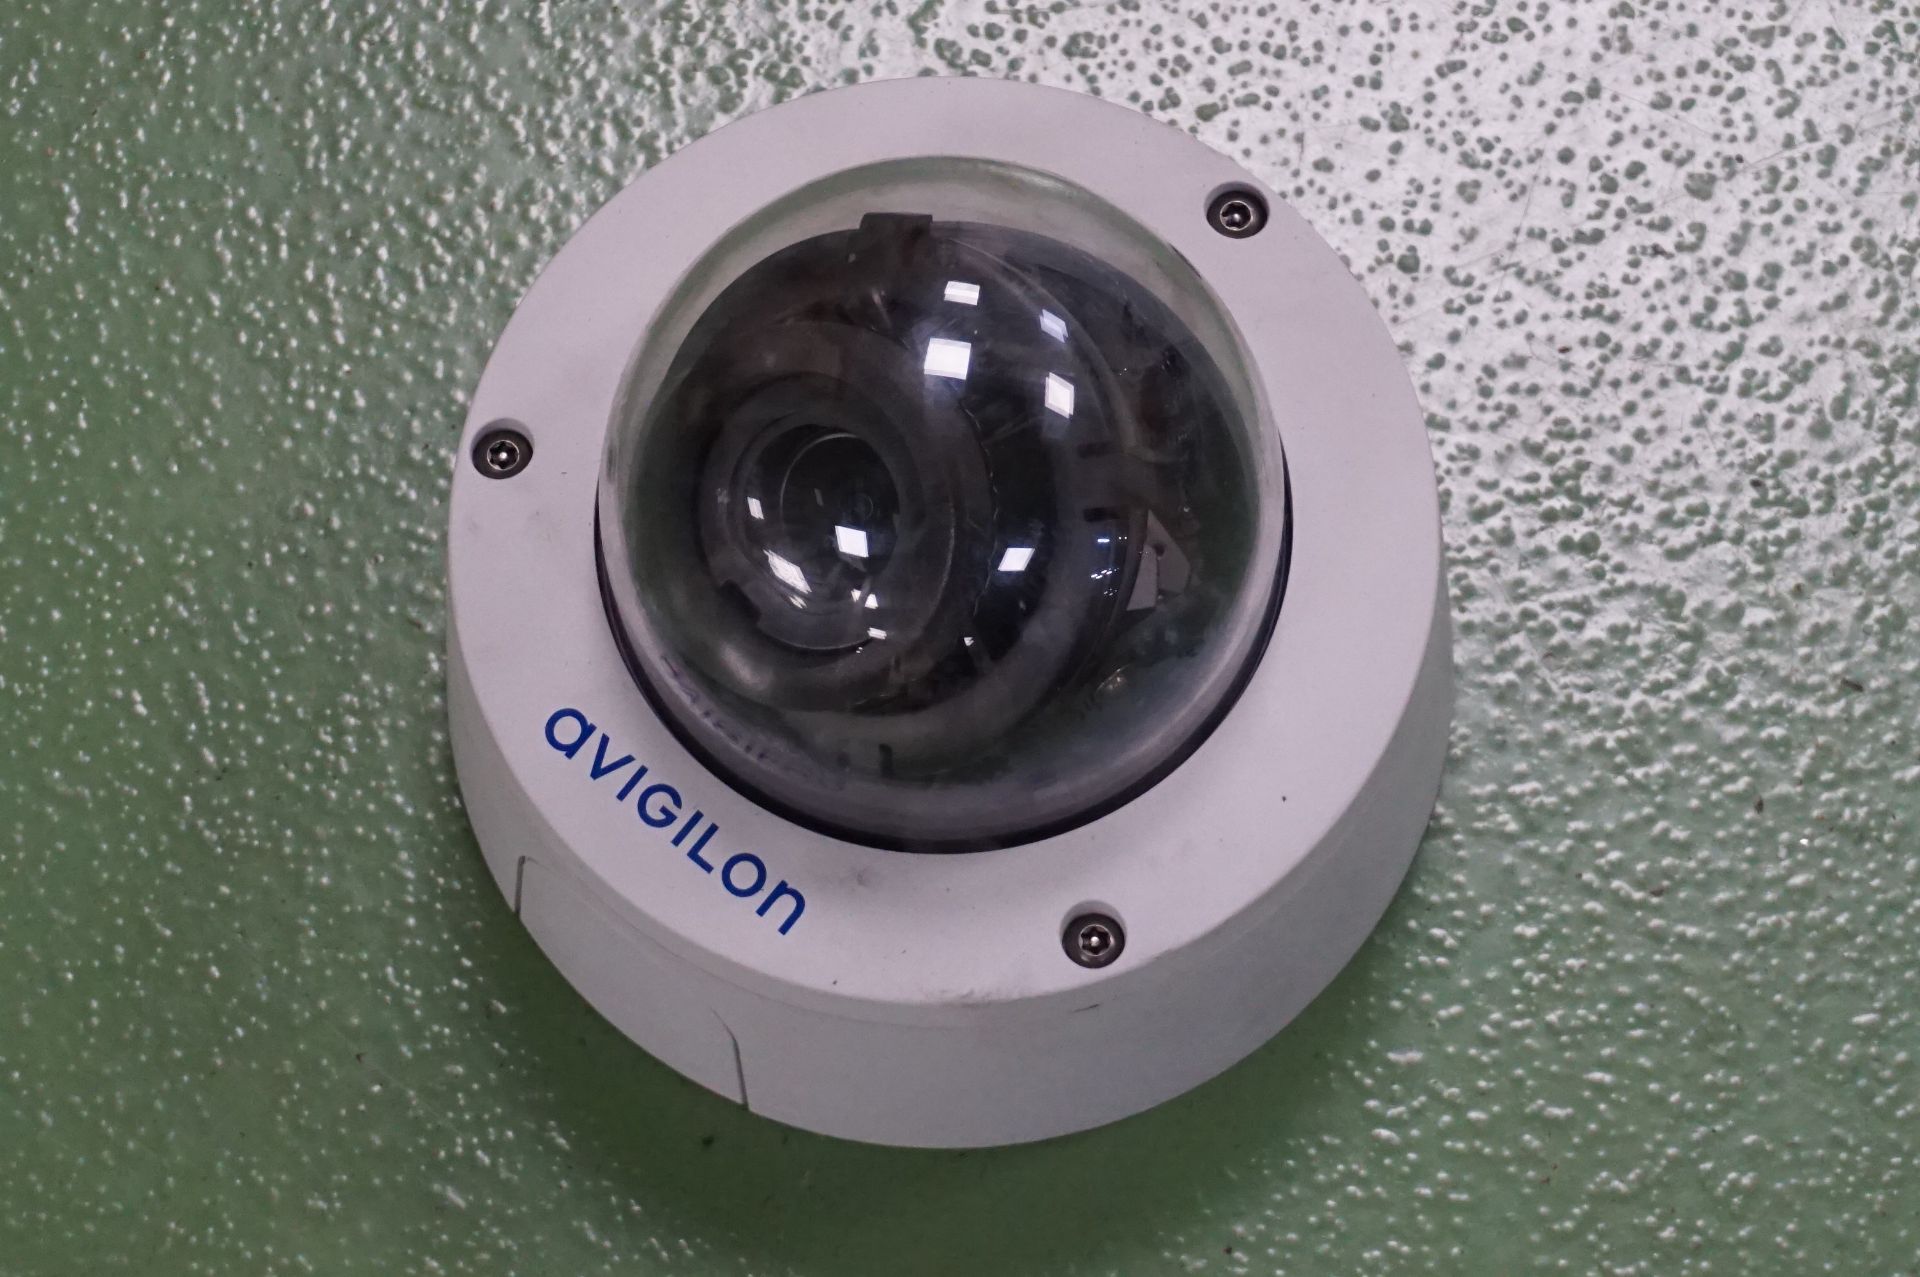 CCTC camera system to include approximately 35 x Aviglion surface mounted camera with 6 x Sanyo VCC- - Image 3 of 5